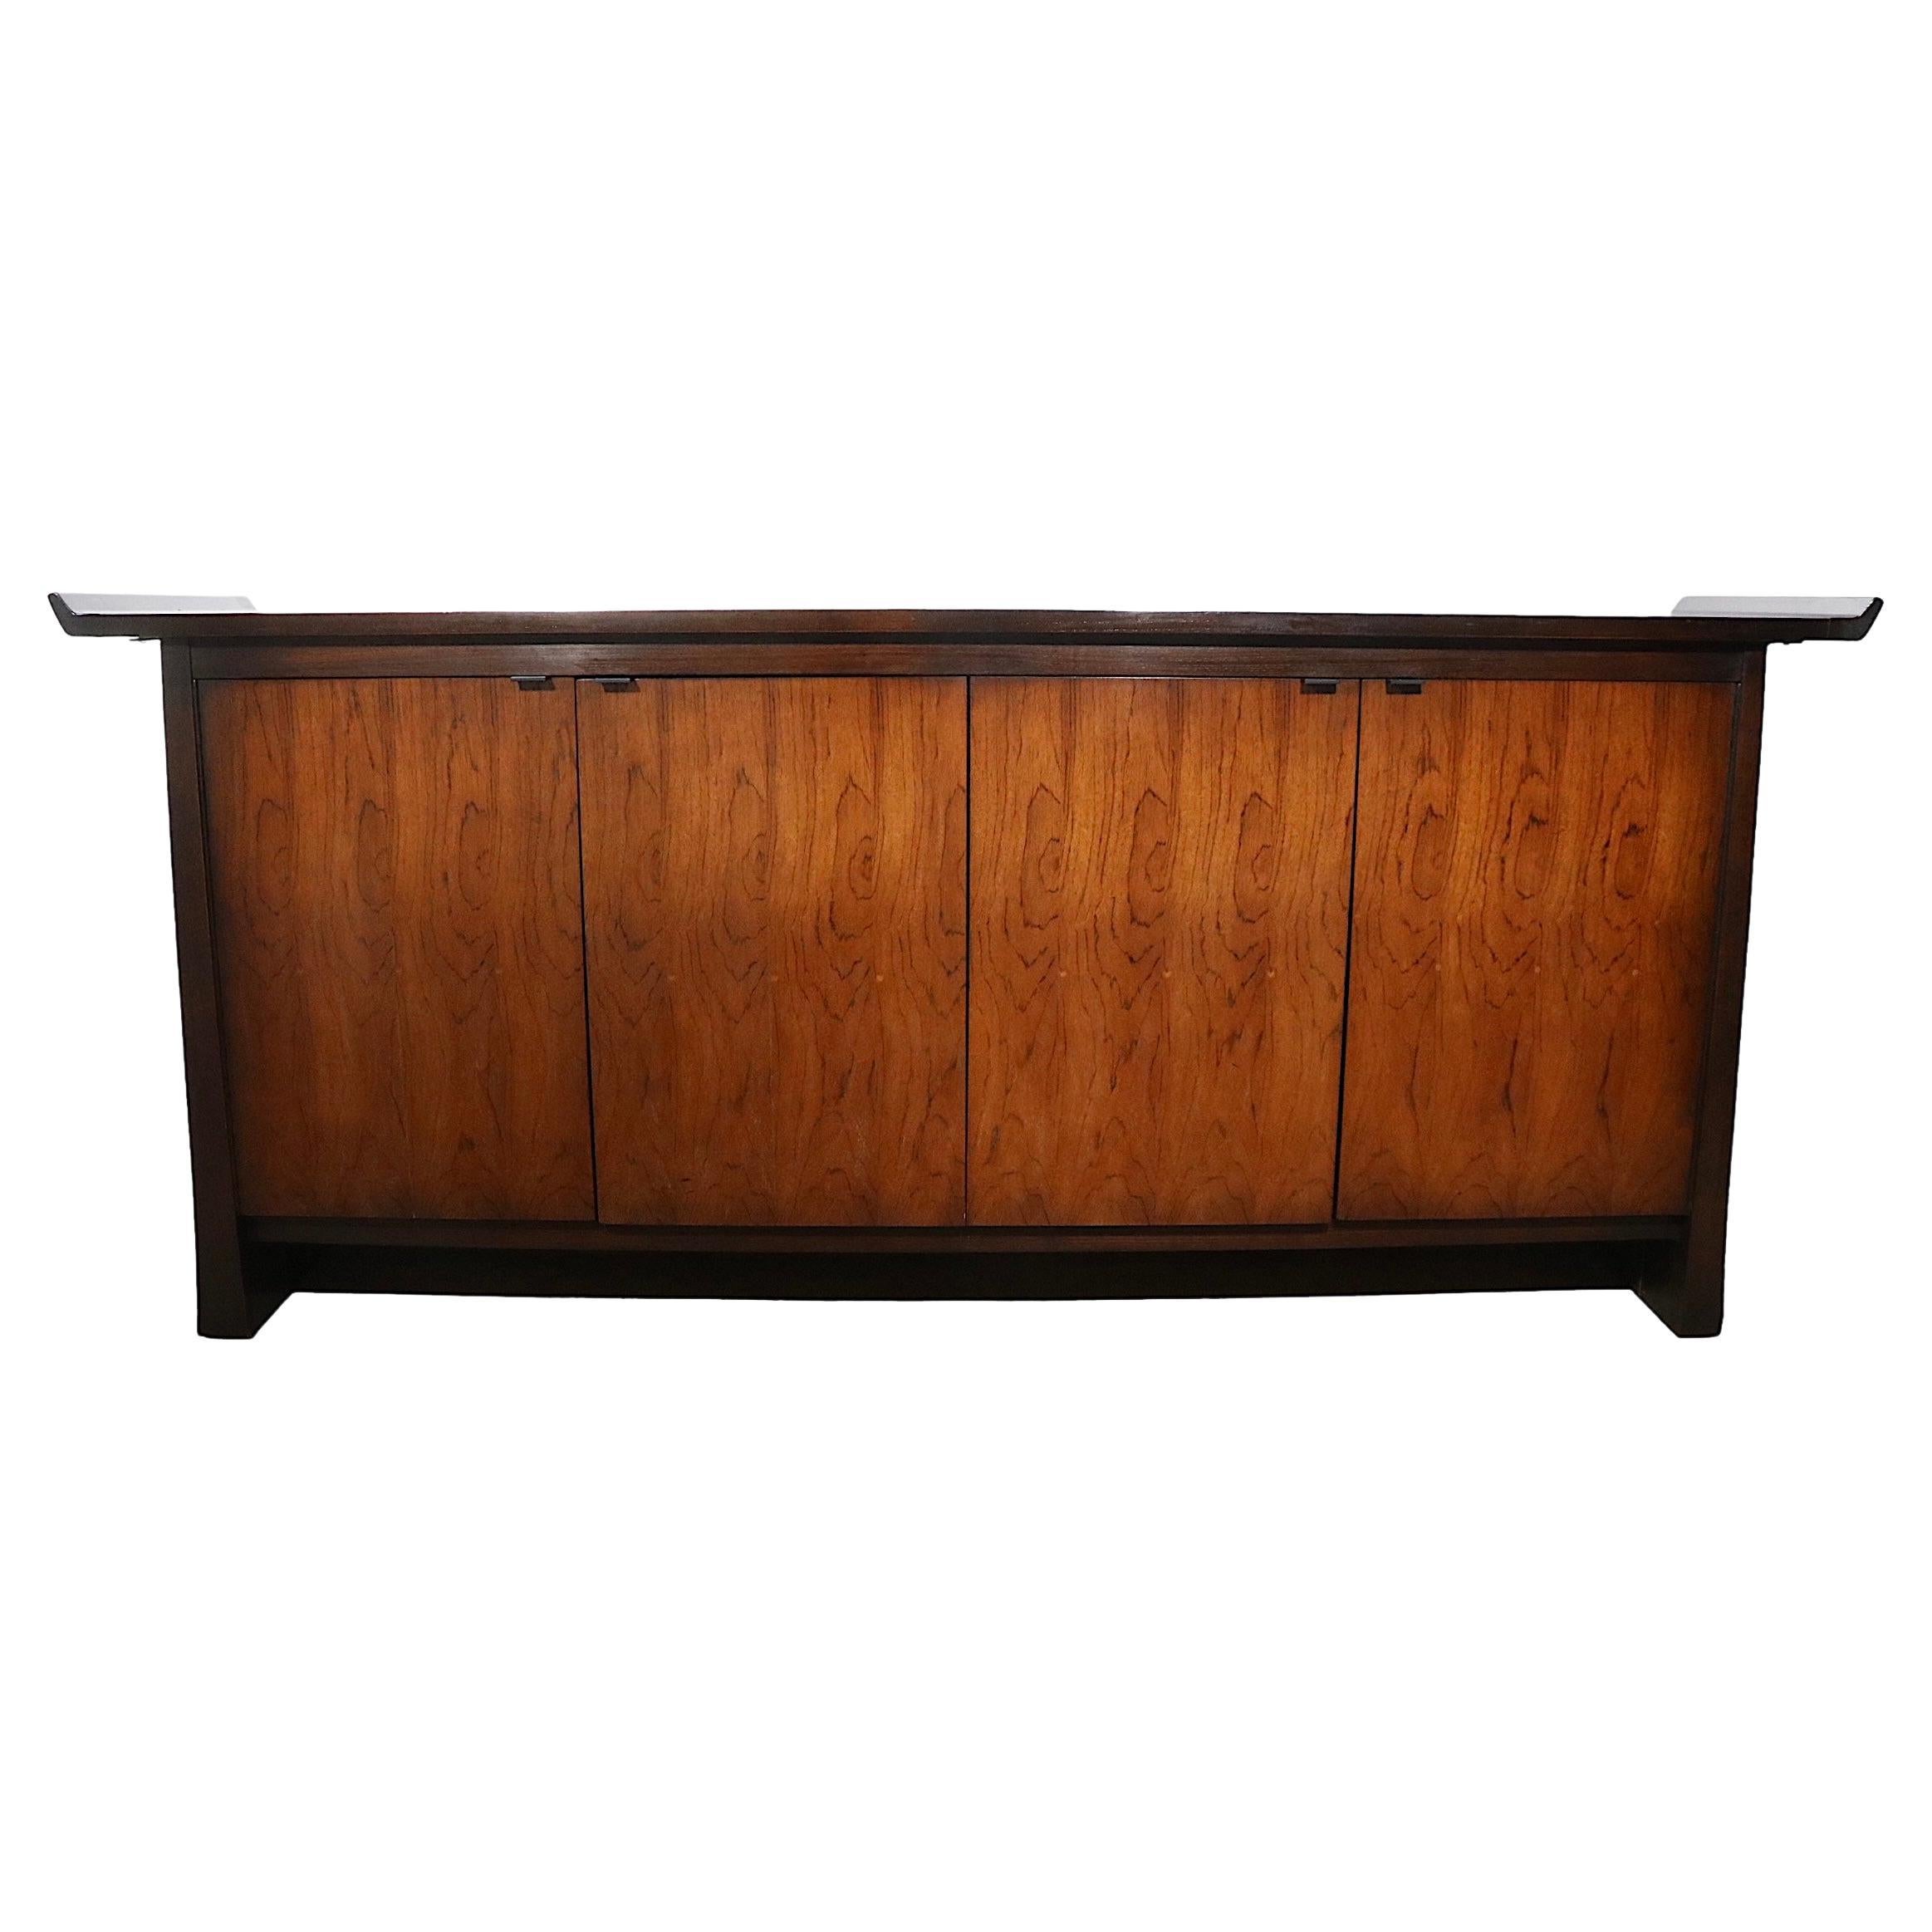 Elegant and sophisticated Asia Modern style credenza made by Bernhardt as part of their celebrated Flair line. This chic sideboard features a dark stained oak case with vibrant book matched rosewood veneer doors (4) which open to reveal open shelved